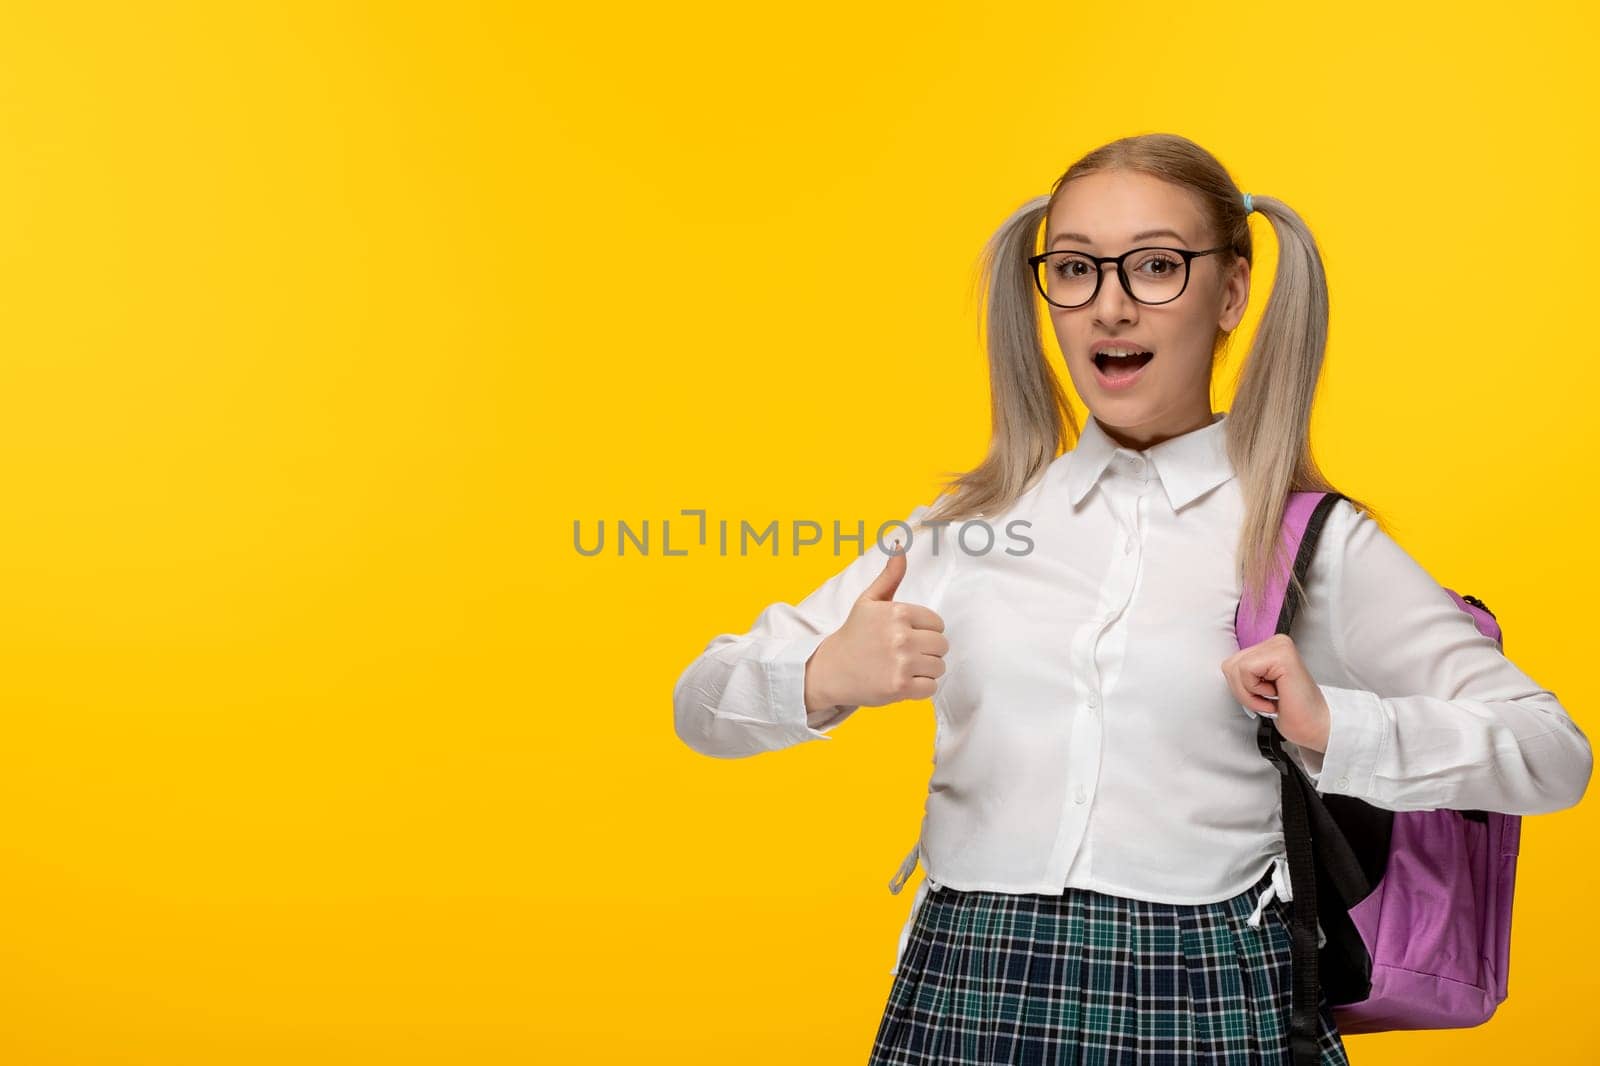 world book day excited schoolgirl showing good hand gesture with pink backpack